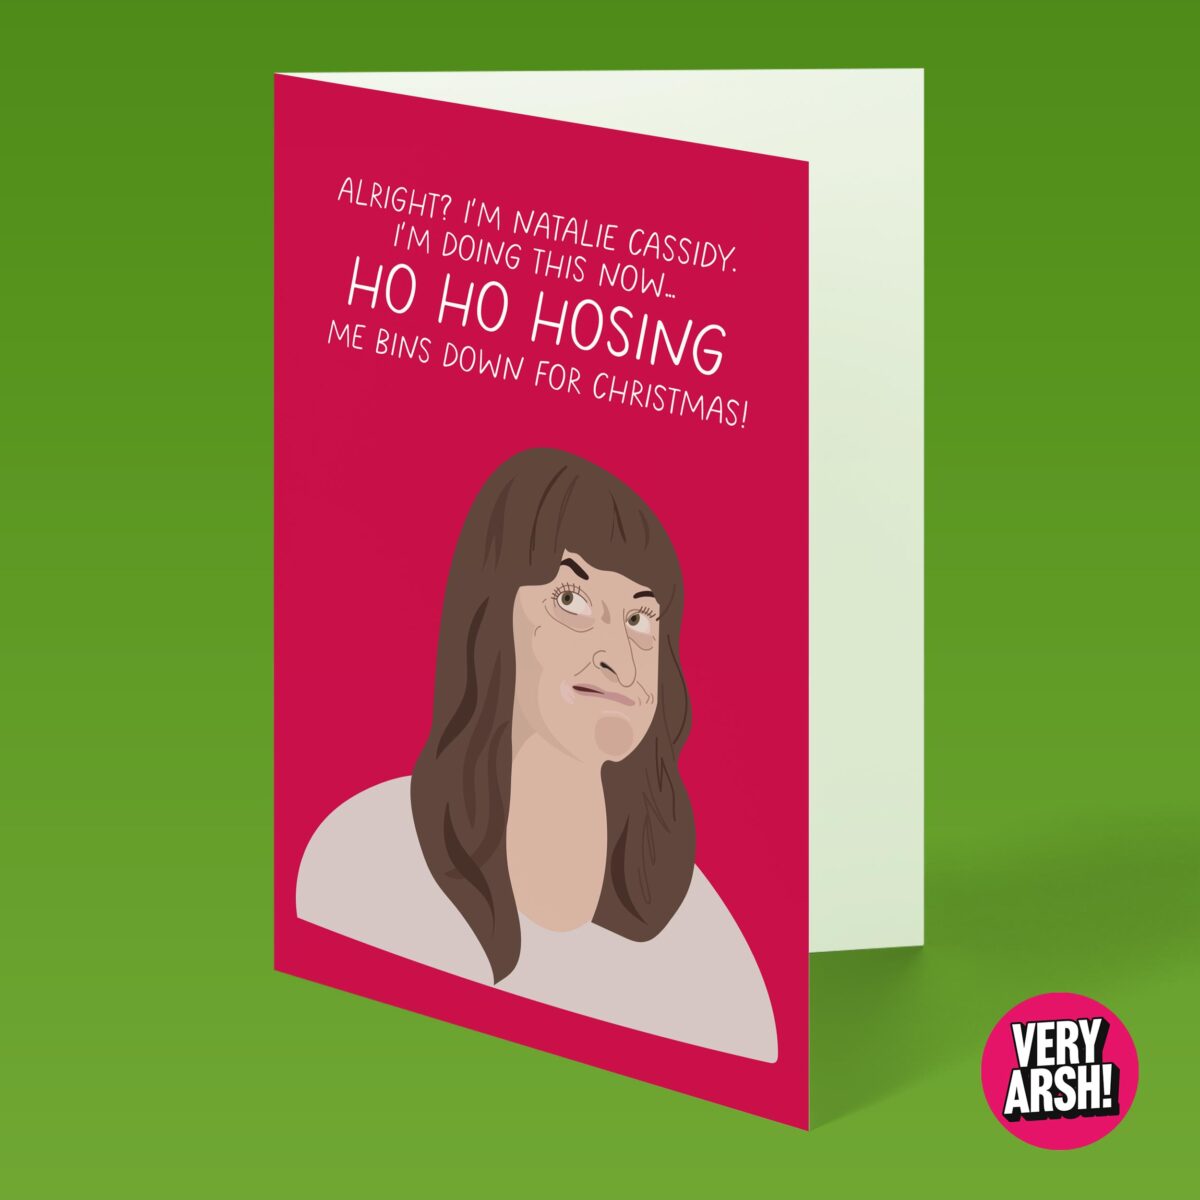 Morgana is Natalie Cassidy Hosing Bins - Natalie Cassidy from Eastenders inspired Christmas Card